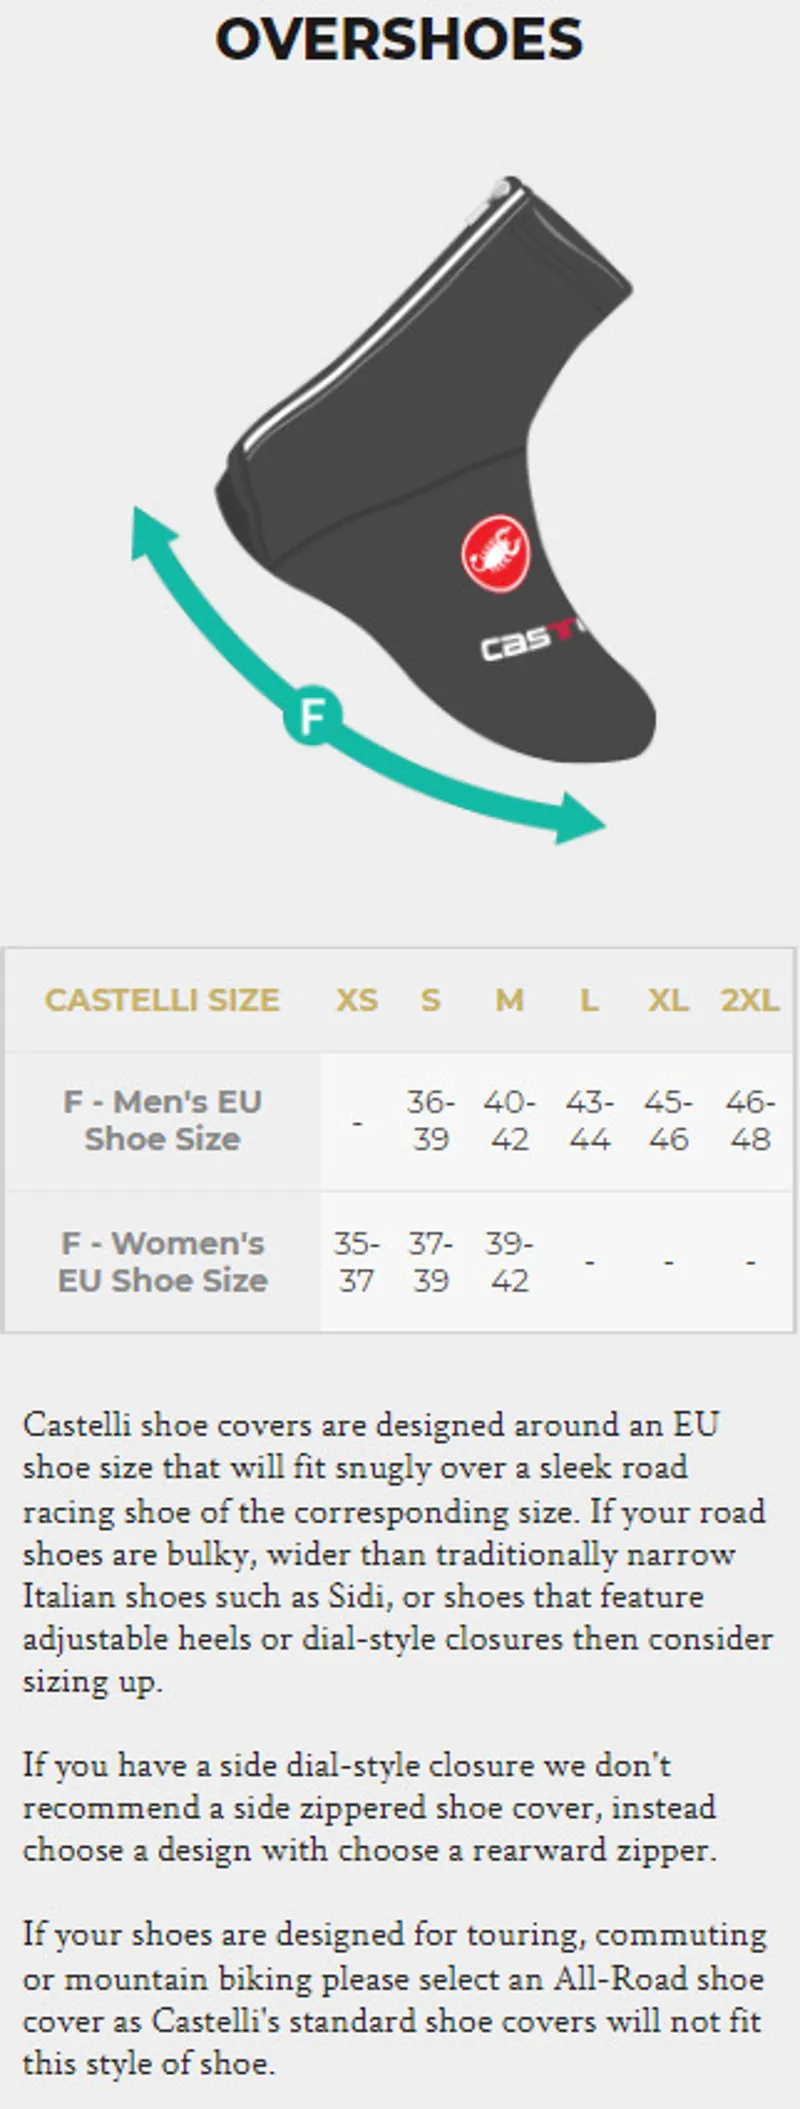 Castelli Overshoes Size Guide